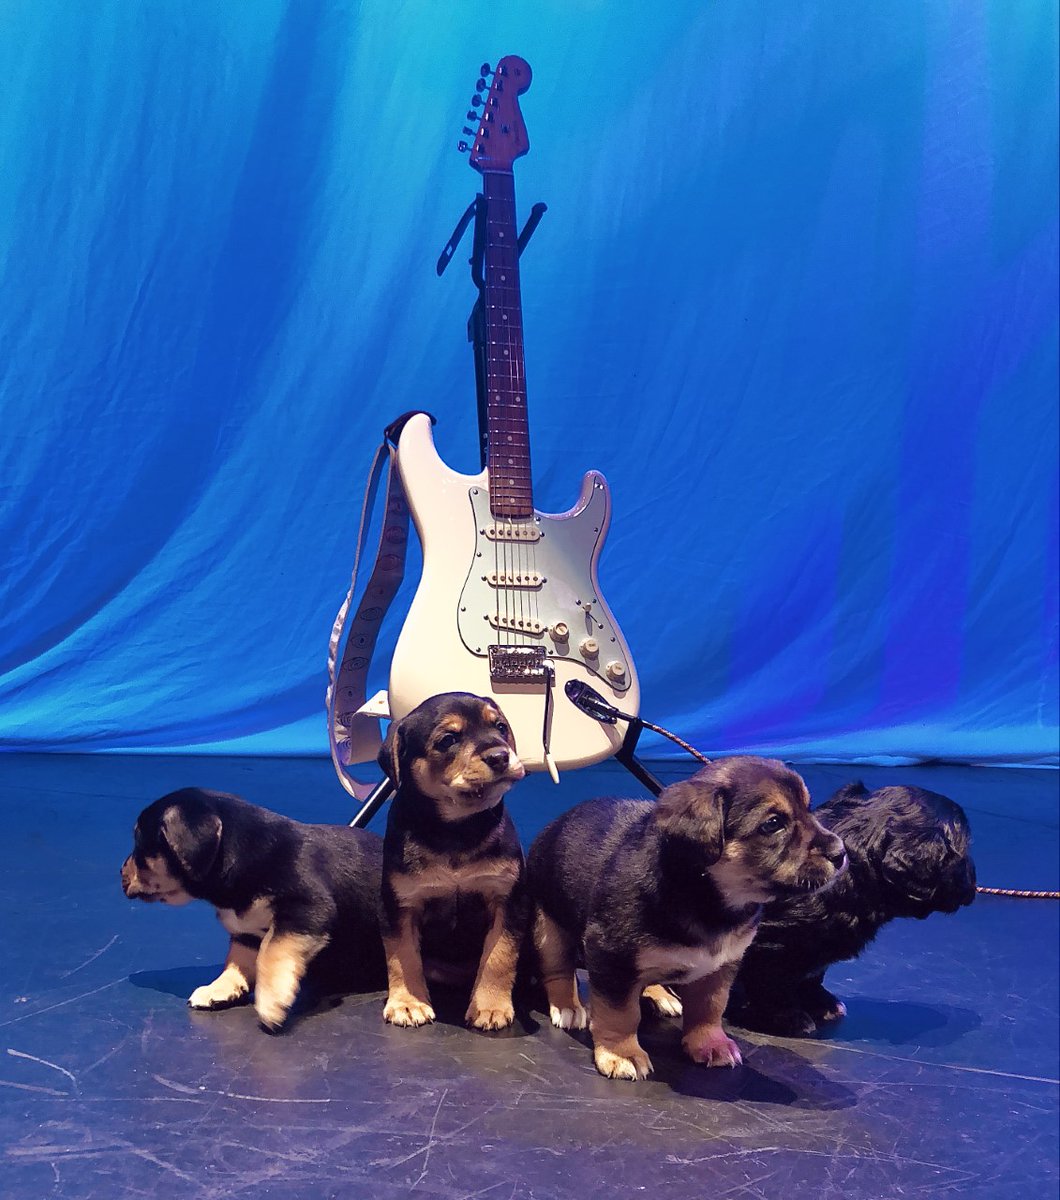 Finally got the band wrangled for soundcheck 🤩 Thank you @WTARescue for providing some puppy therapy today at The Fillmore!